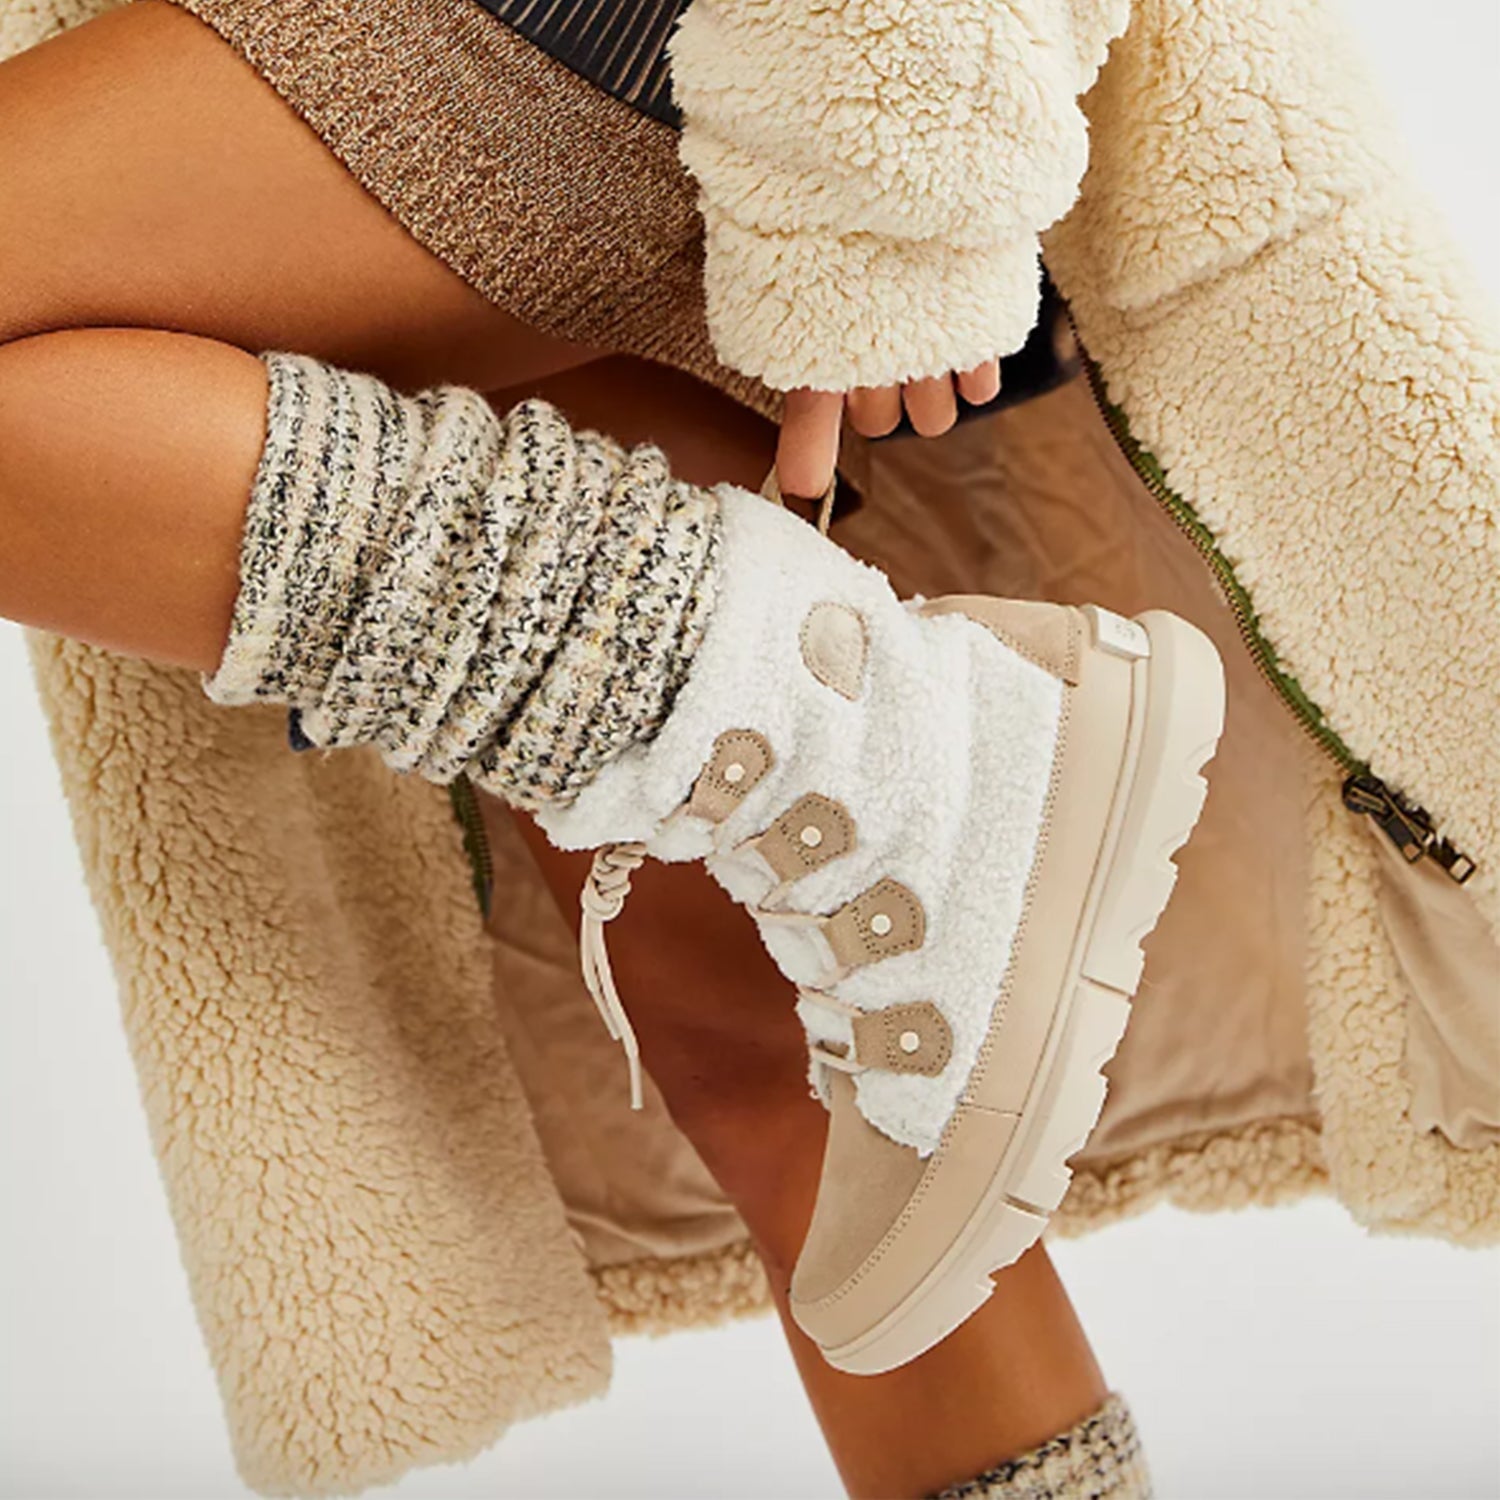 Our Top Winter Boot Picks!